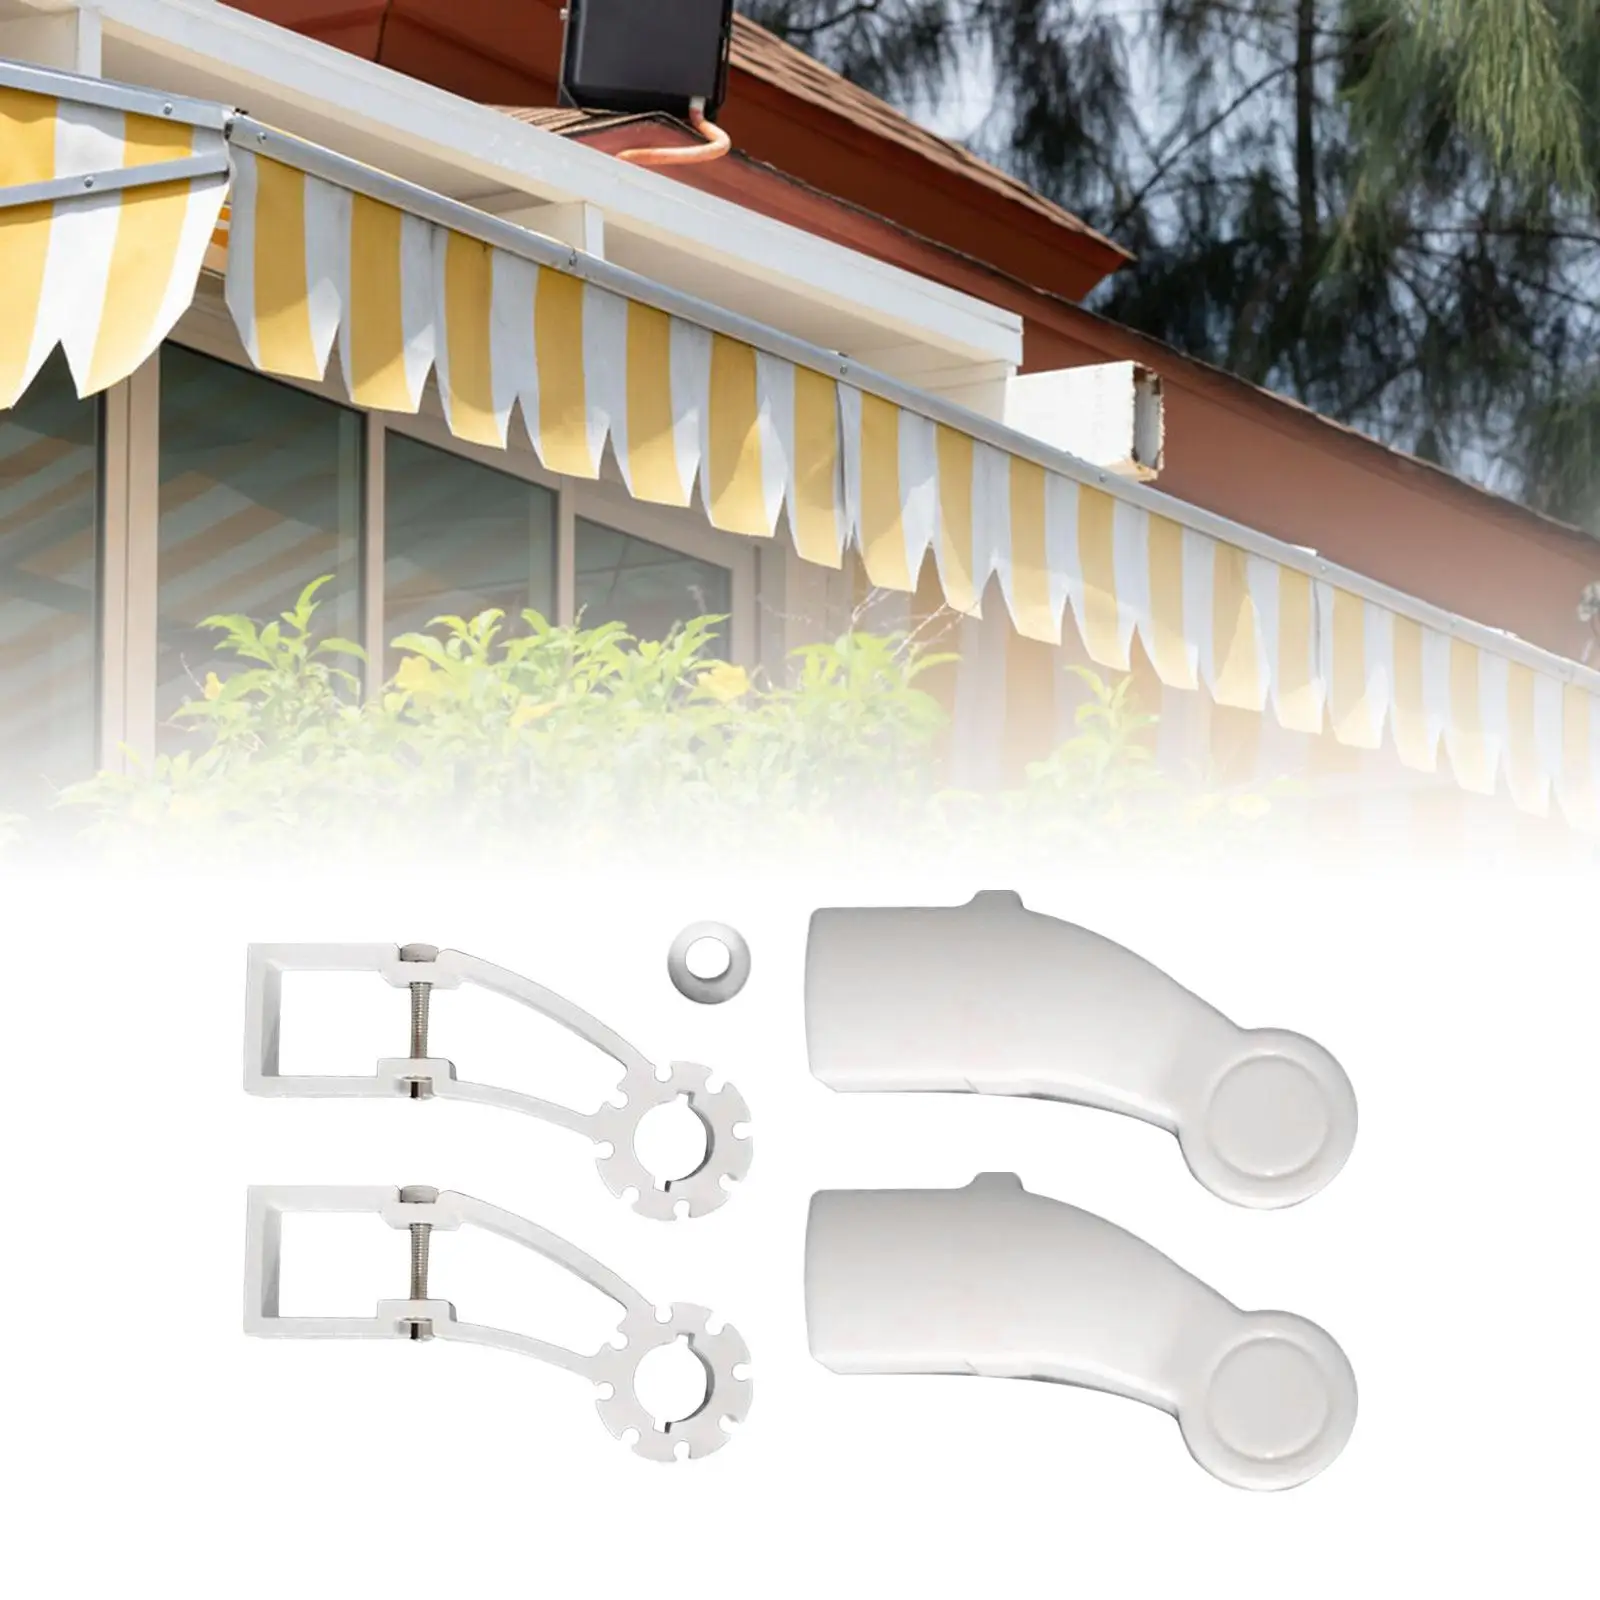 Awning Brackets suits 40mm Square Tube Easy to Install White Awning Gearbox Brackets Mounting Brackets Side Brackets for Camper